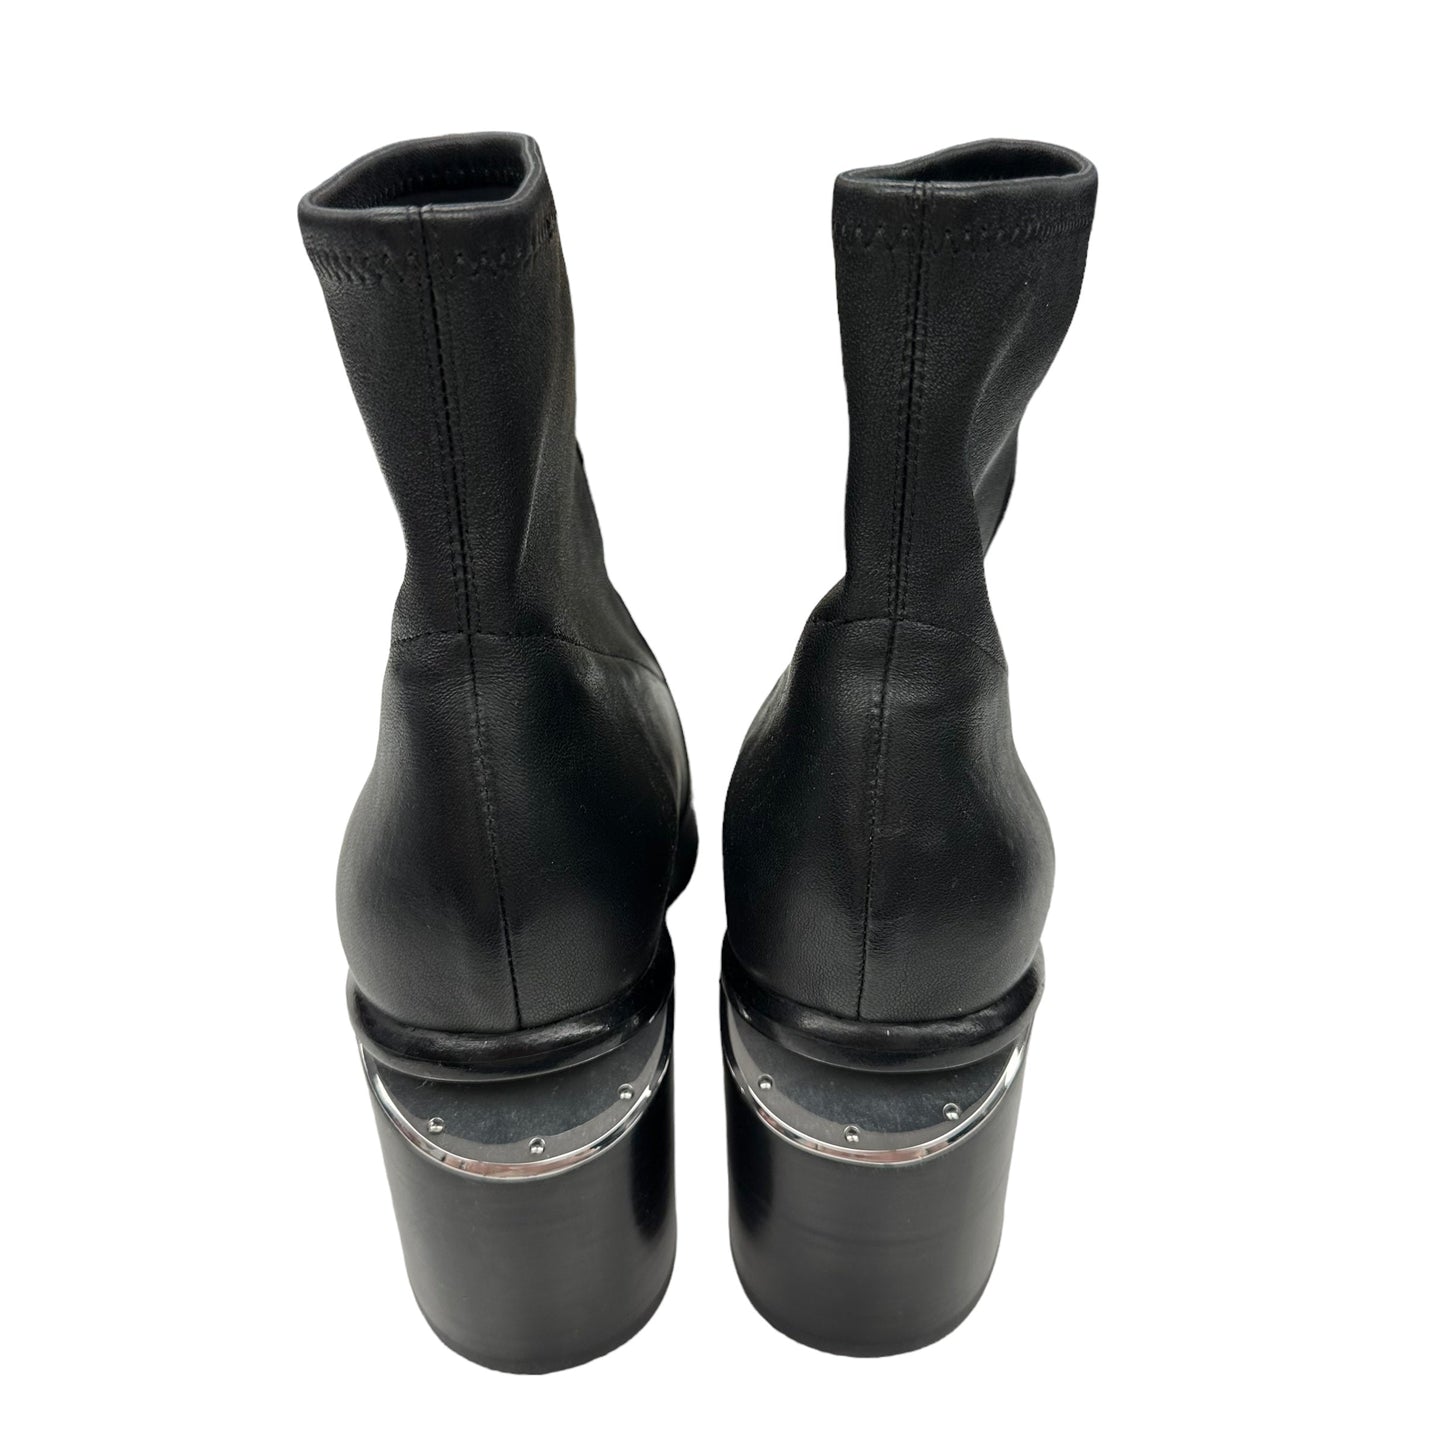 Boots Luxury Designer By Alexander Wang  Size: 9